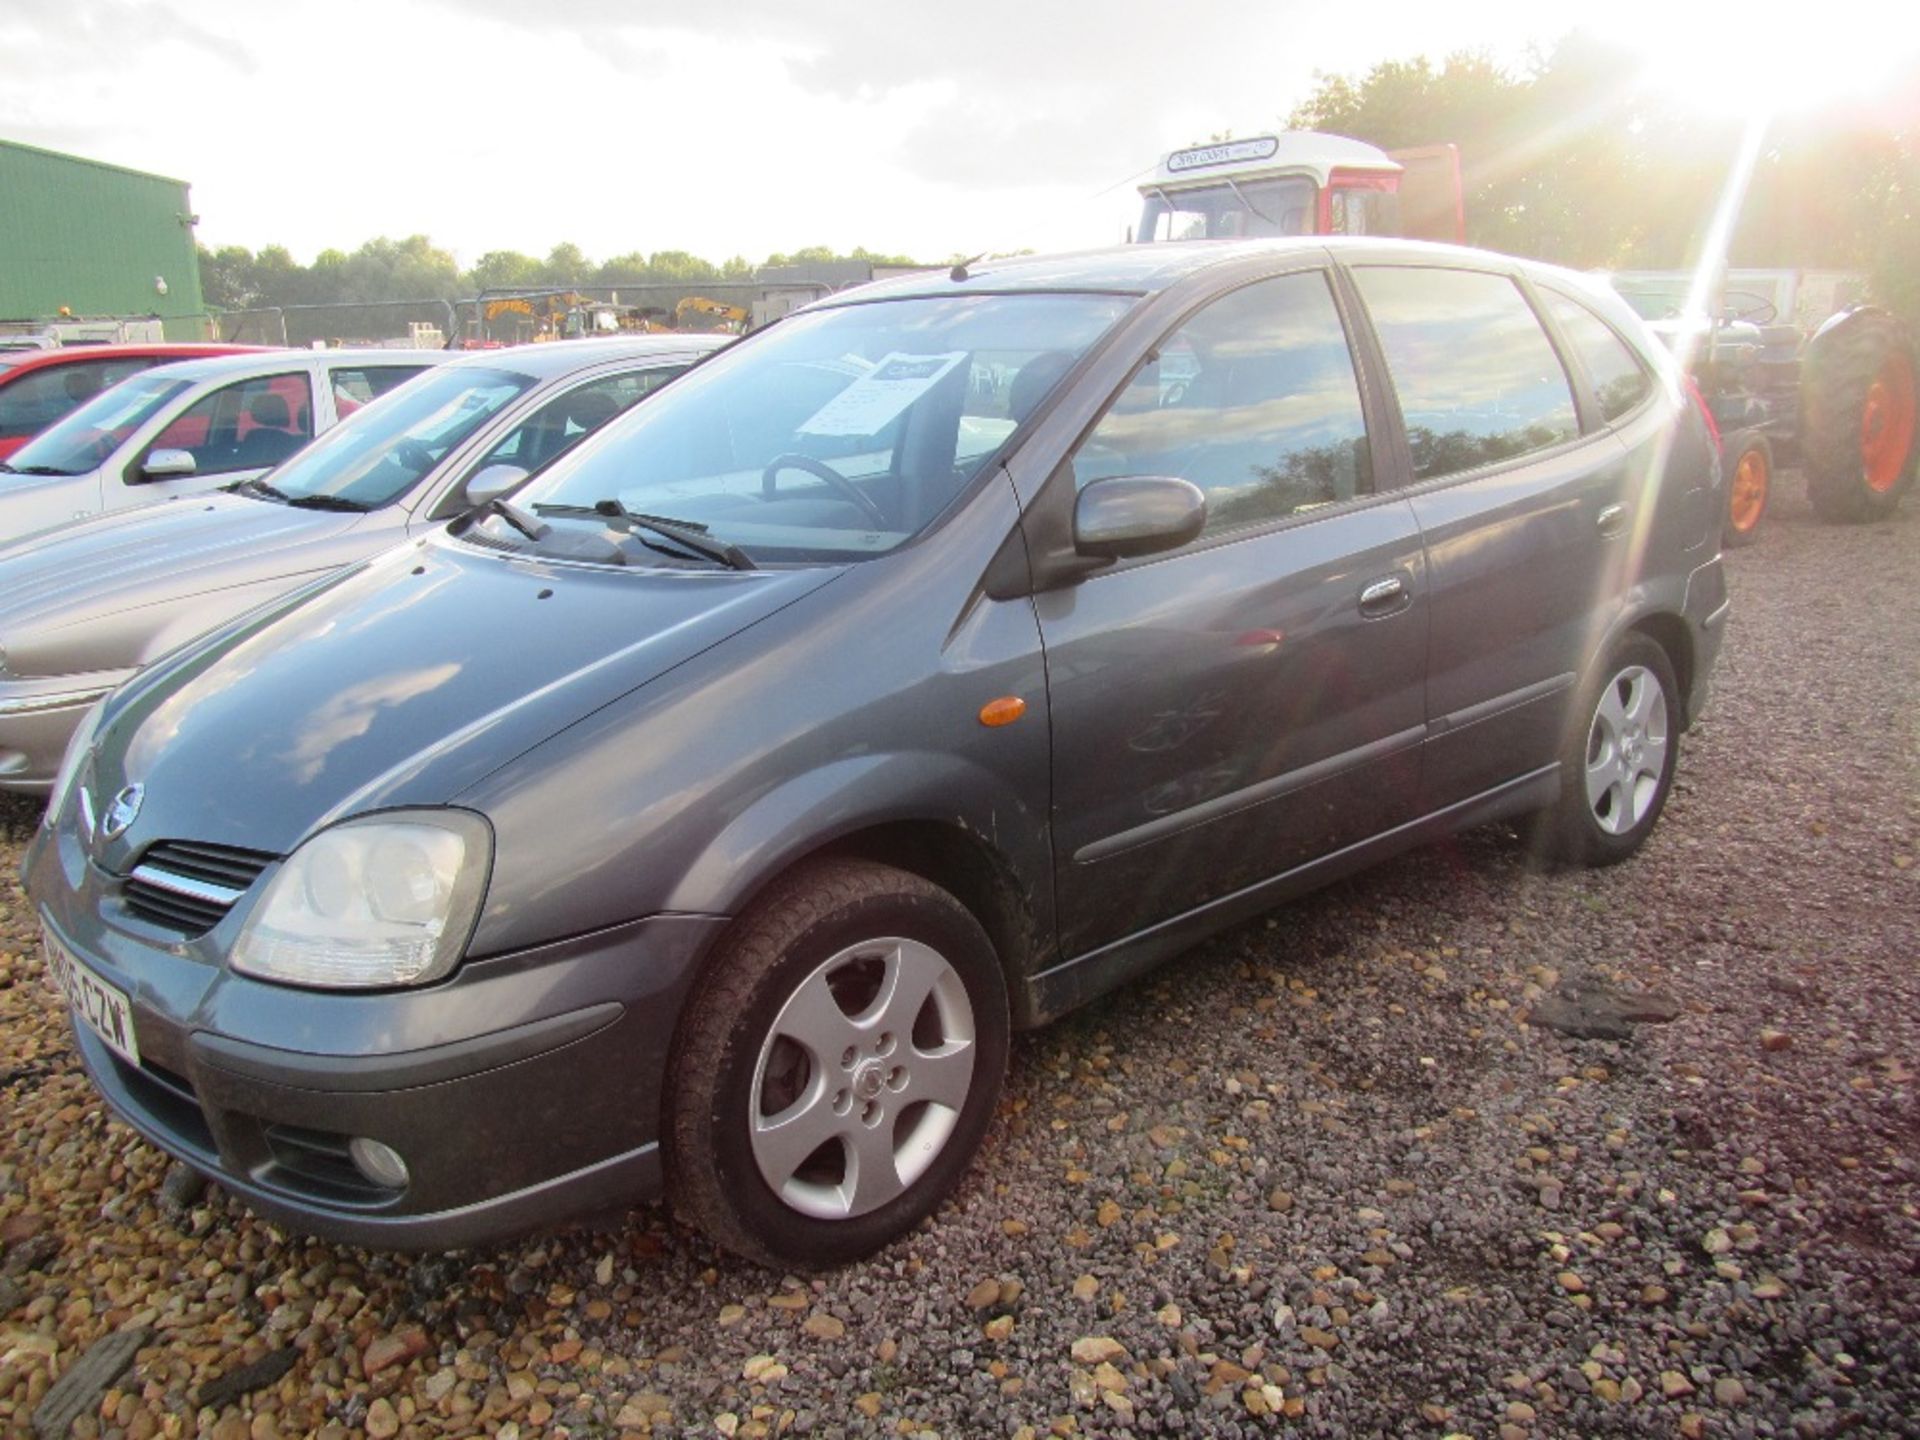 2005 Nissan Almera Tino - Spares & Repairs, Engine requires attention. Registration Documents will